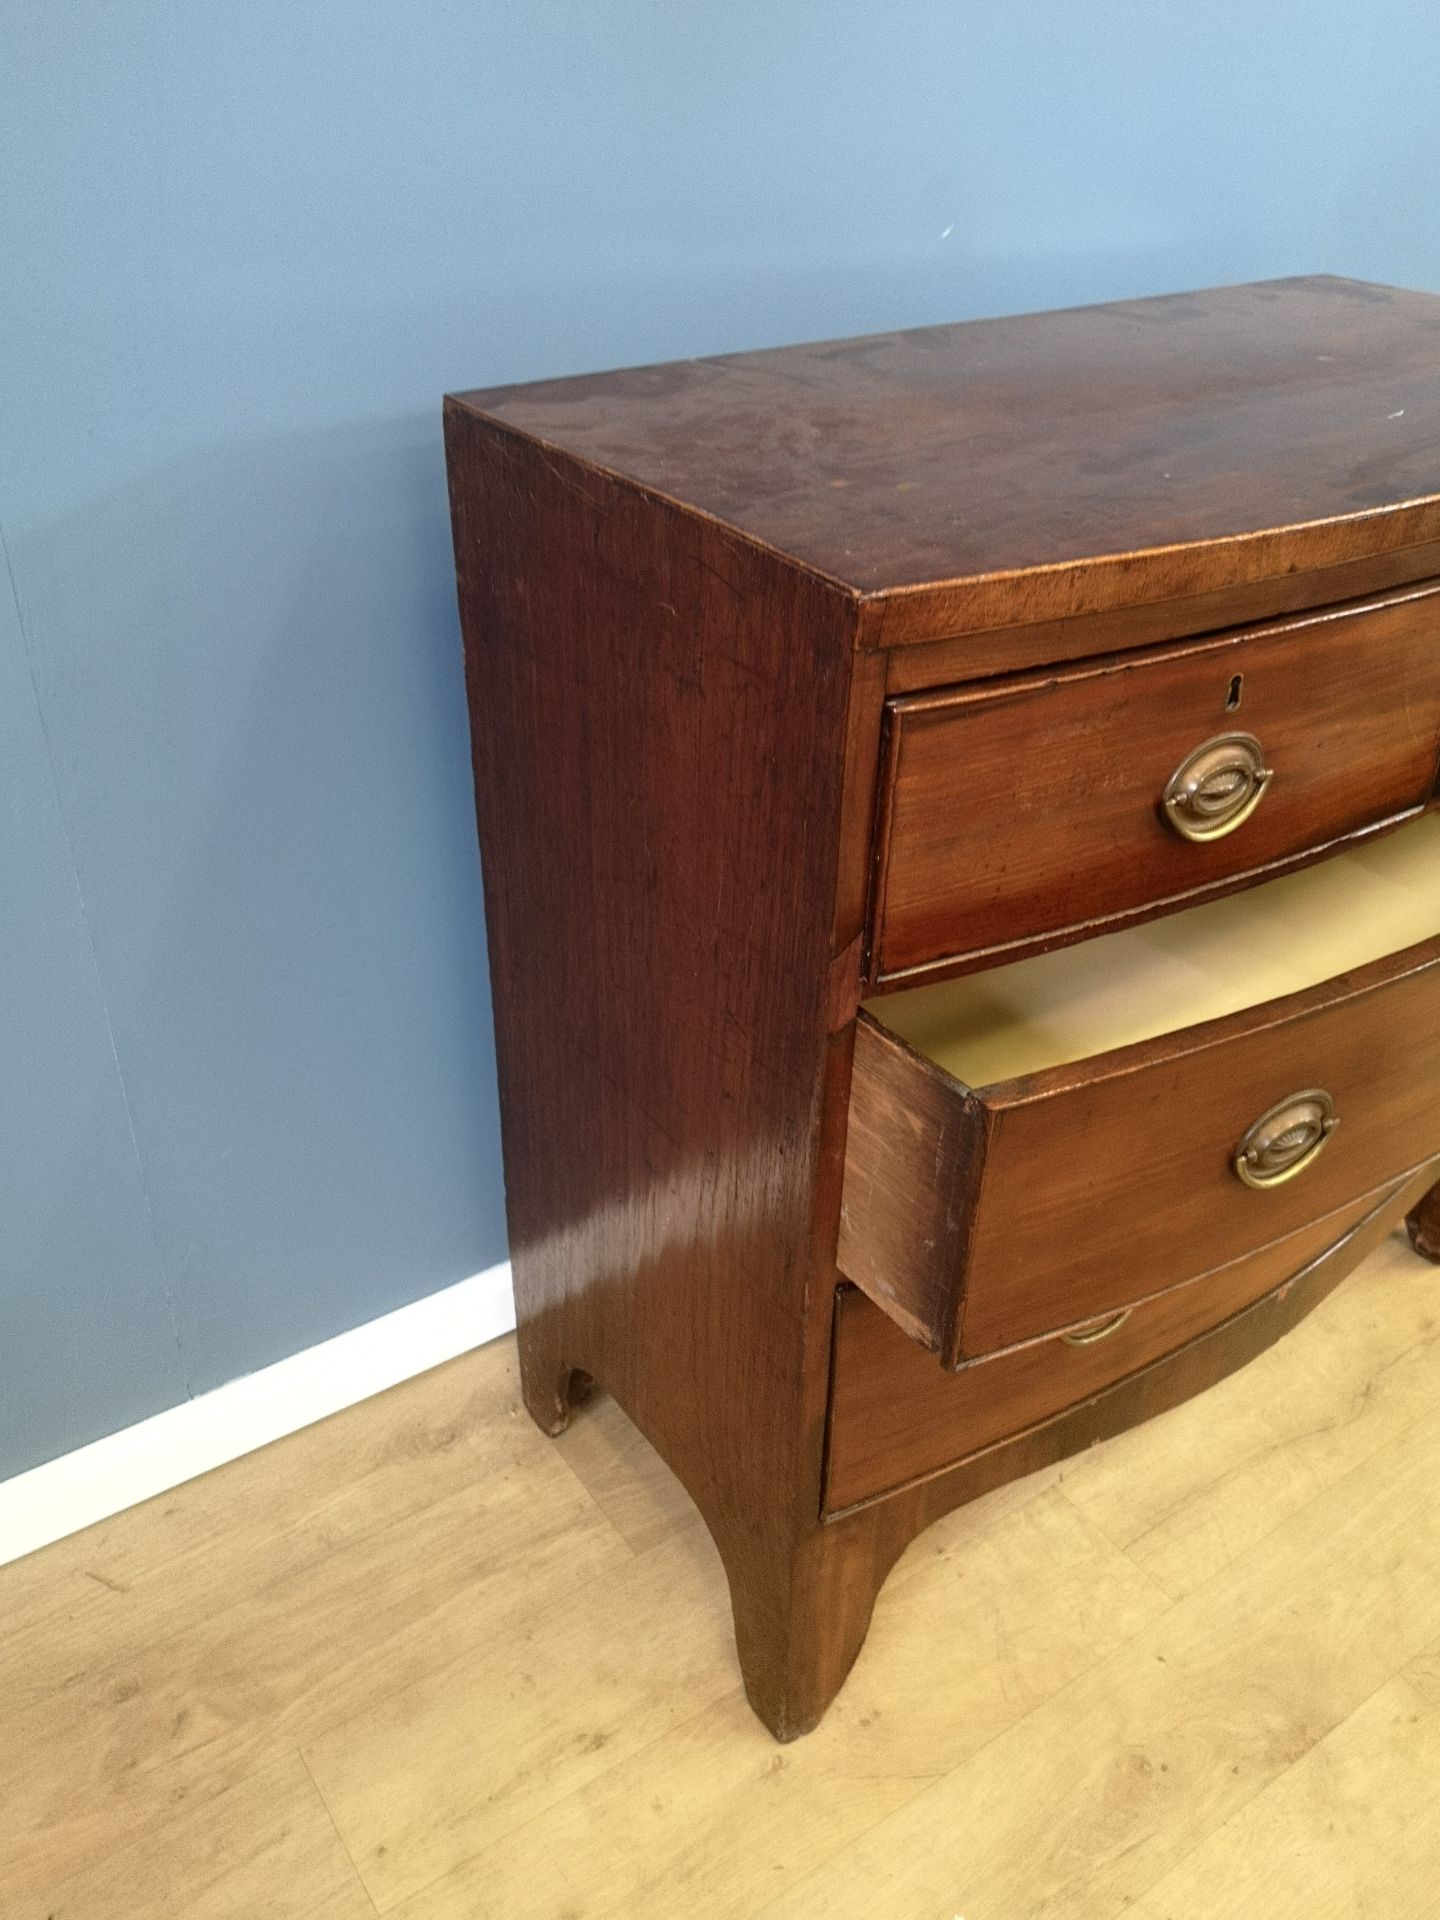 Regency mahogany chest of drawers - Image 4 of 6